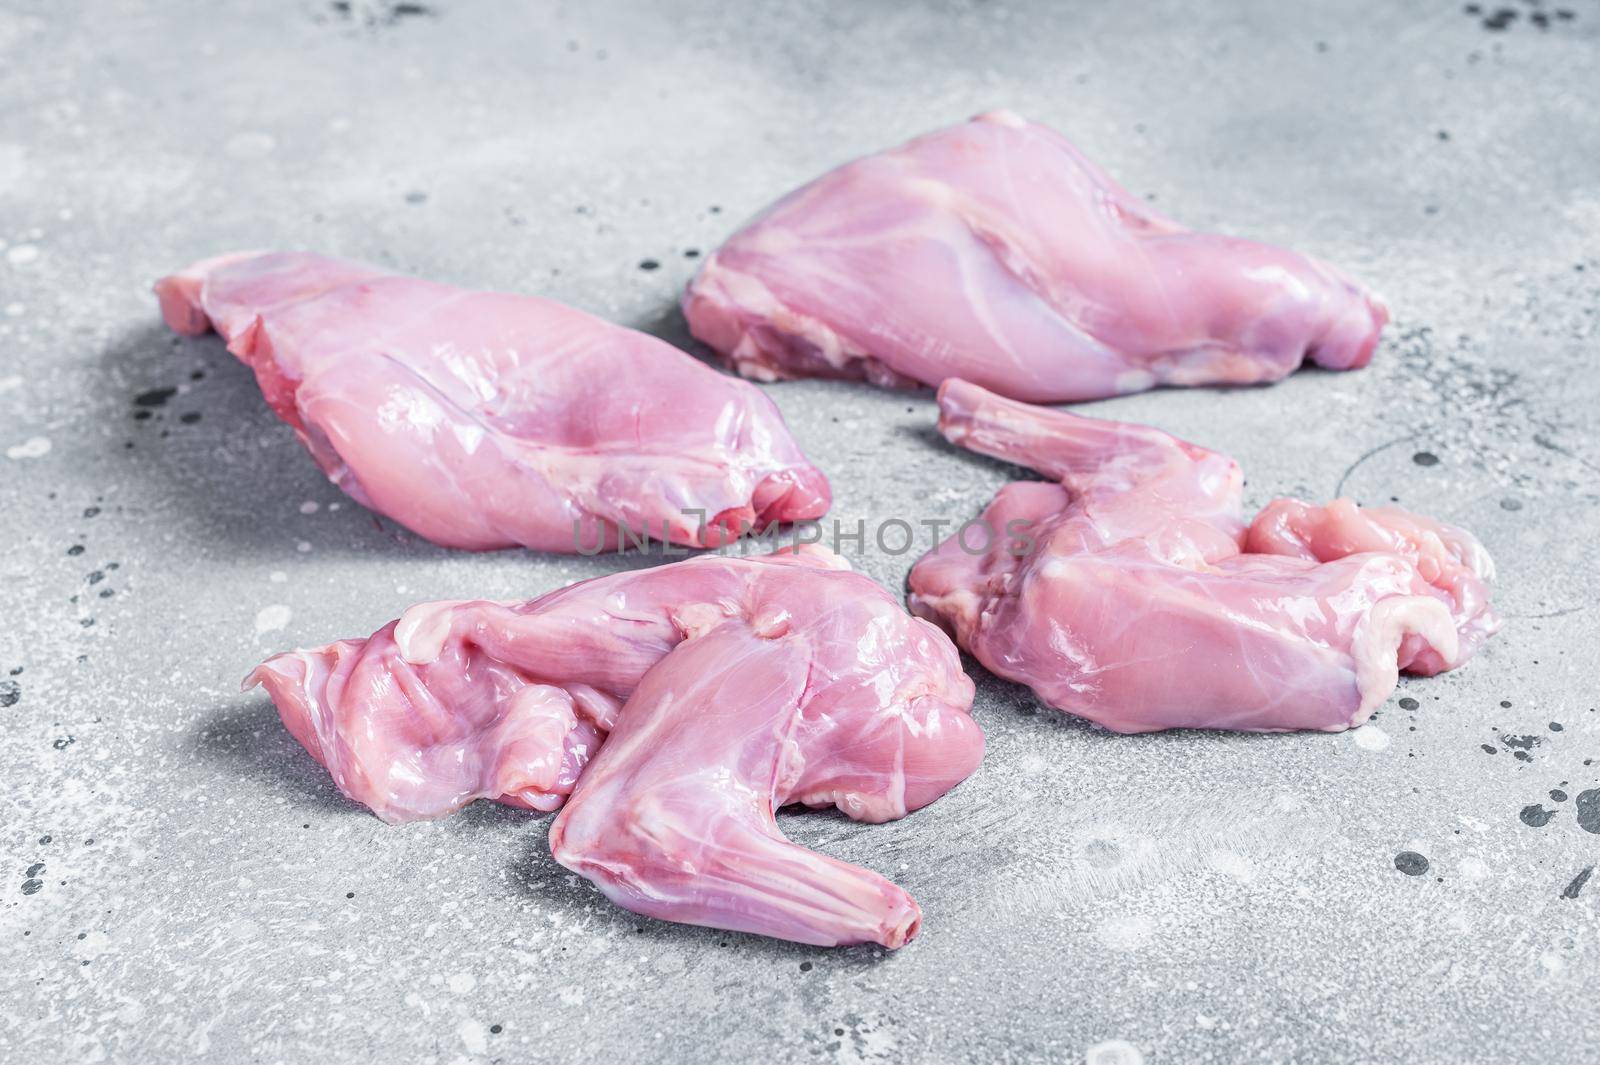 Raw rabbit legs slices on a butcher board. Gray background. Top view by Composter